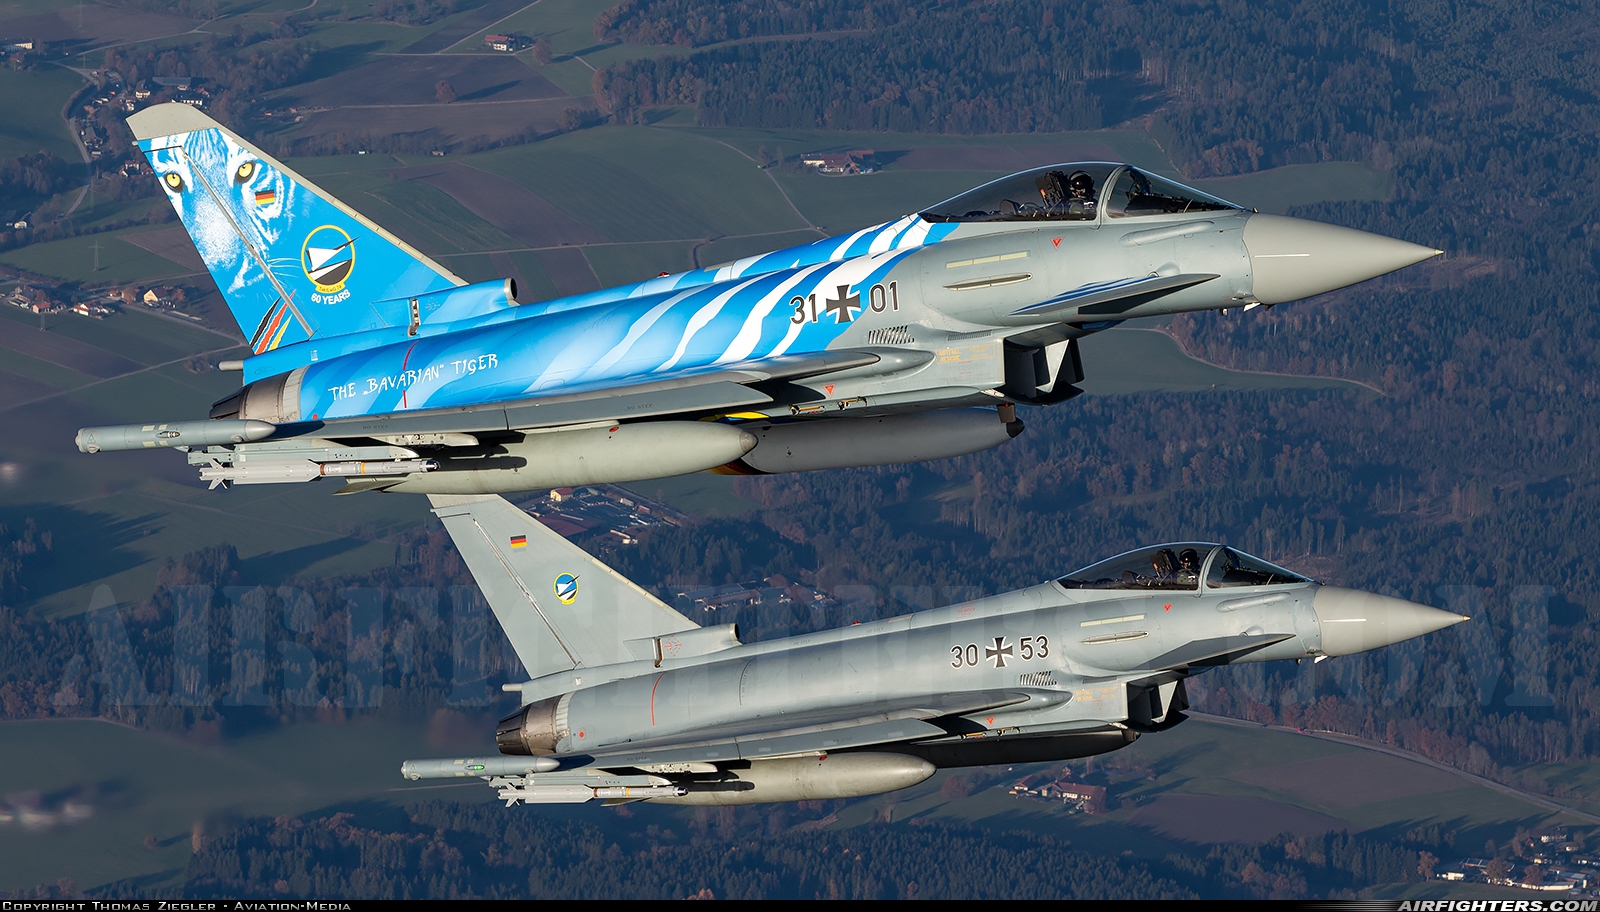 Germany - Air Force Eurofighter EF-2000 Typhoon S 31+01 at In Flight, Germany